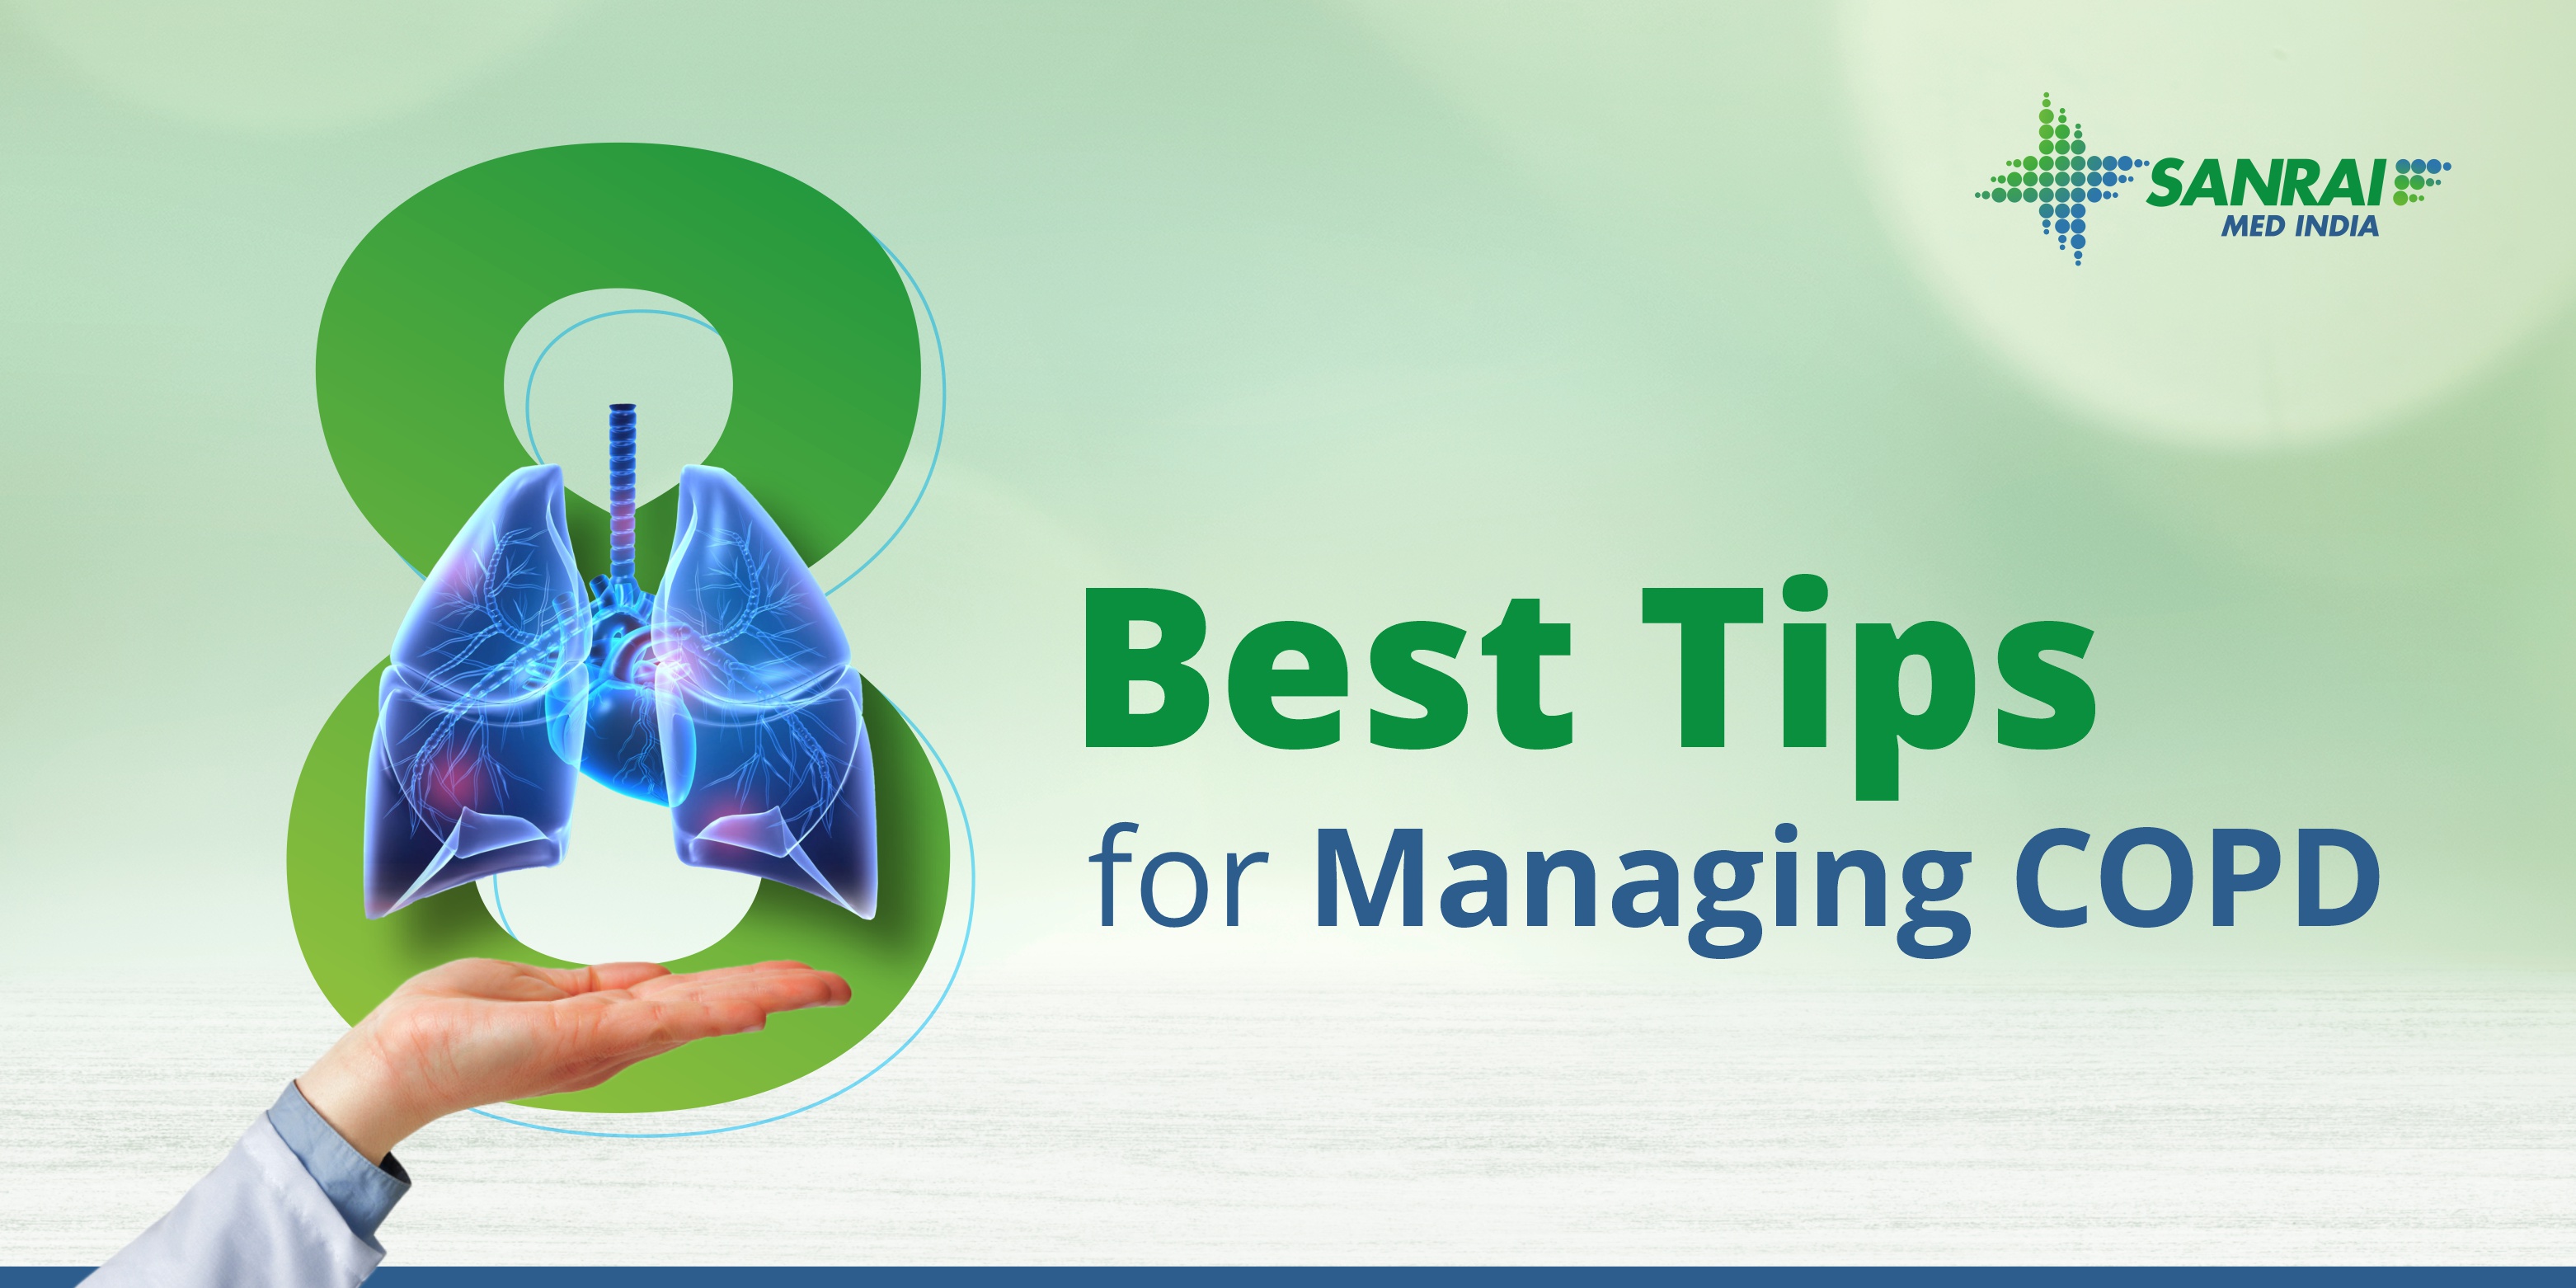 8 Best Tips for Managing COPD